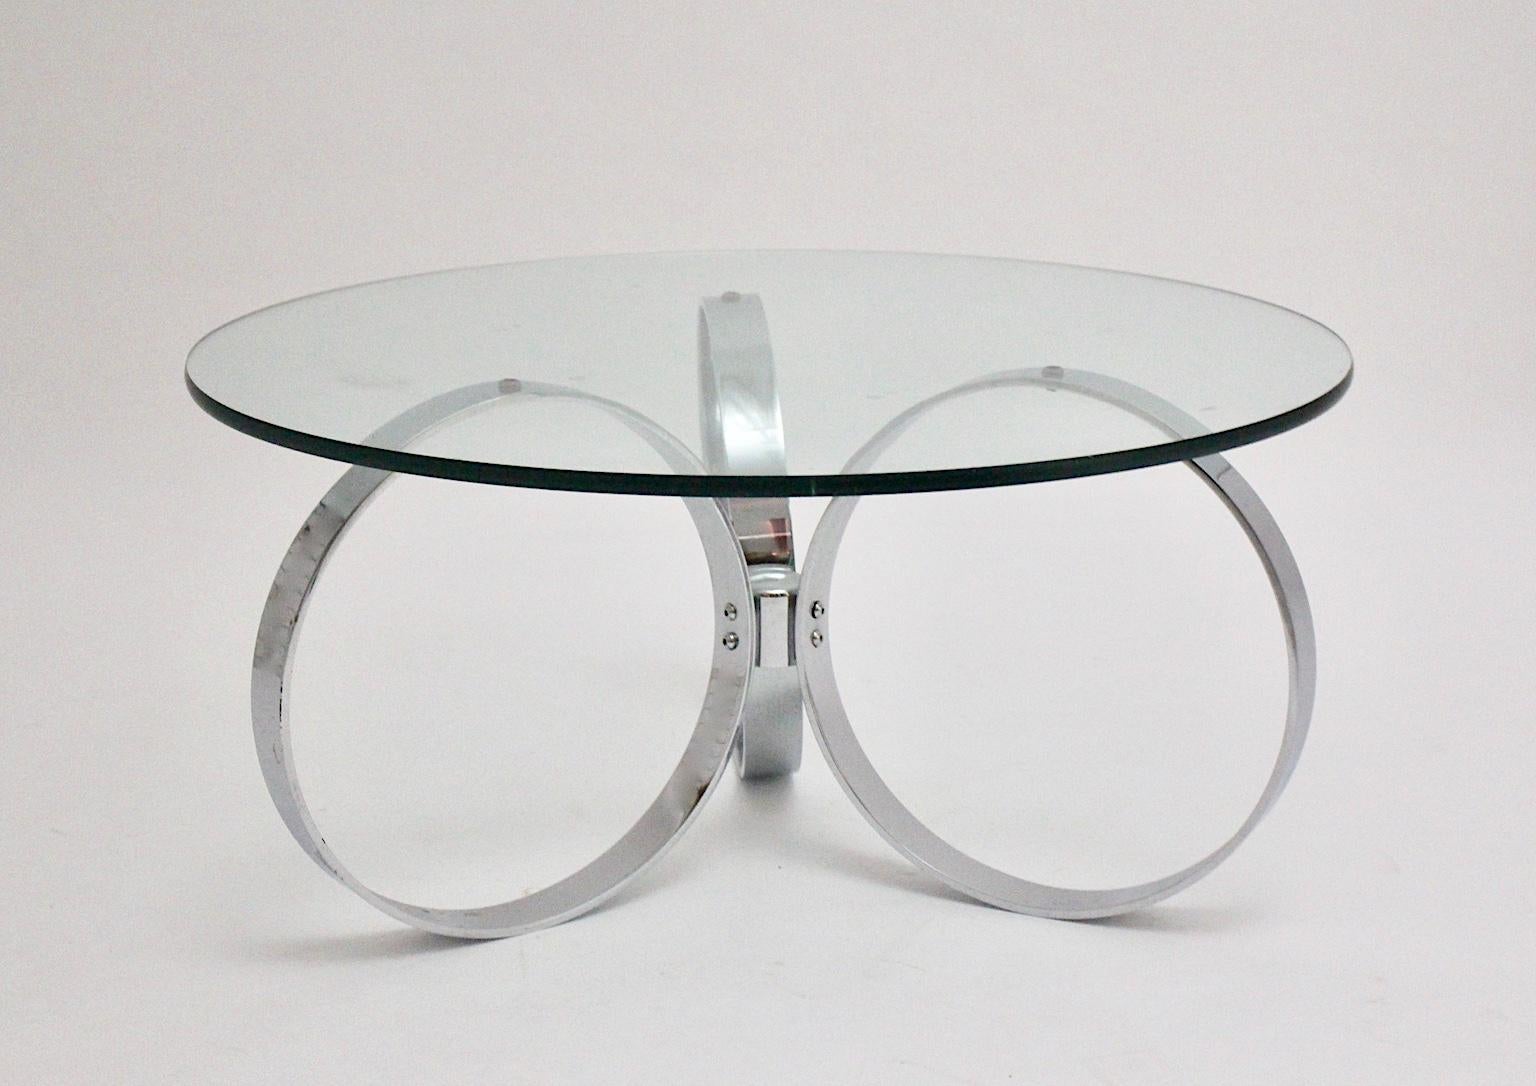 space age vintage coffee table / sofa table, which shows a chromed base formed with three rings. While a clear glass plate topped the table, the chromed metal base produce a futuristic appearance. In the 1960s people appreciated cool design. It was